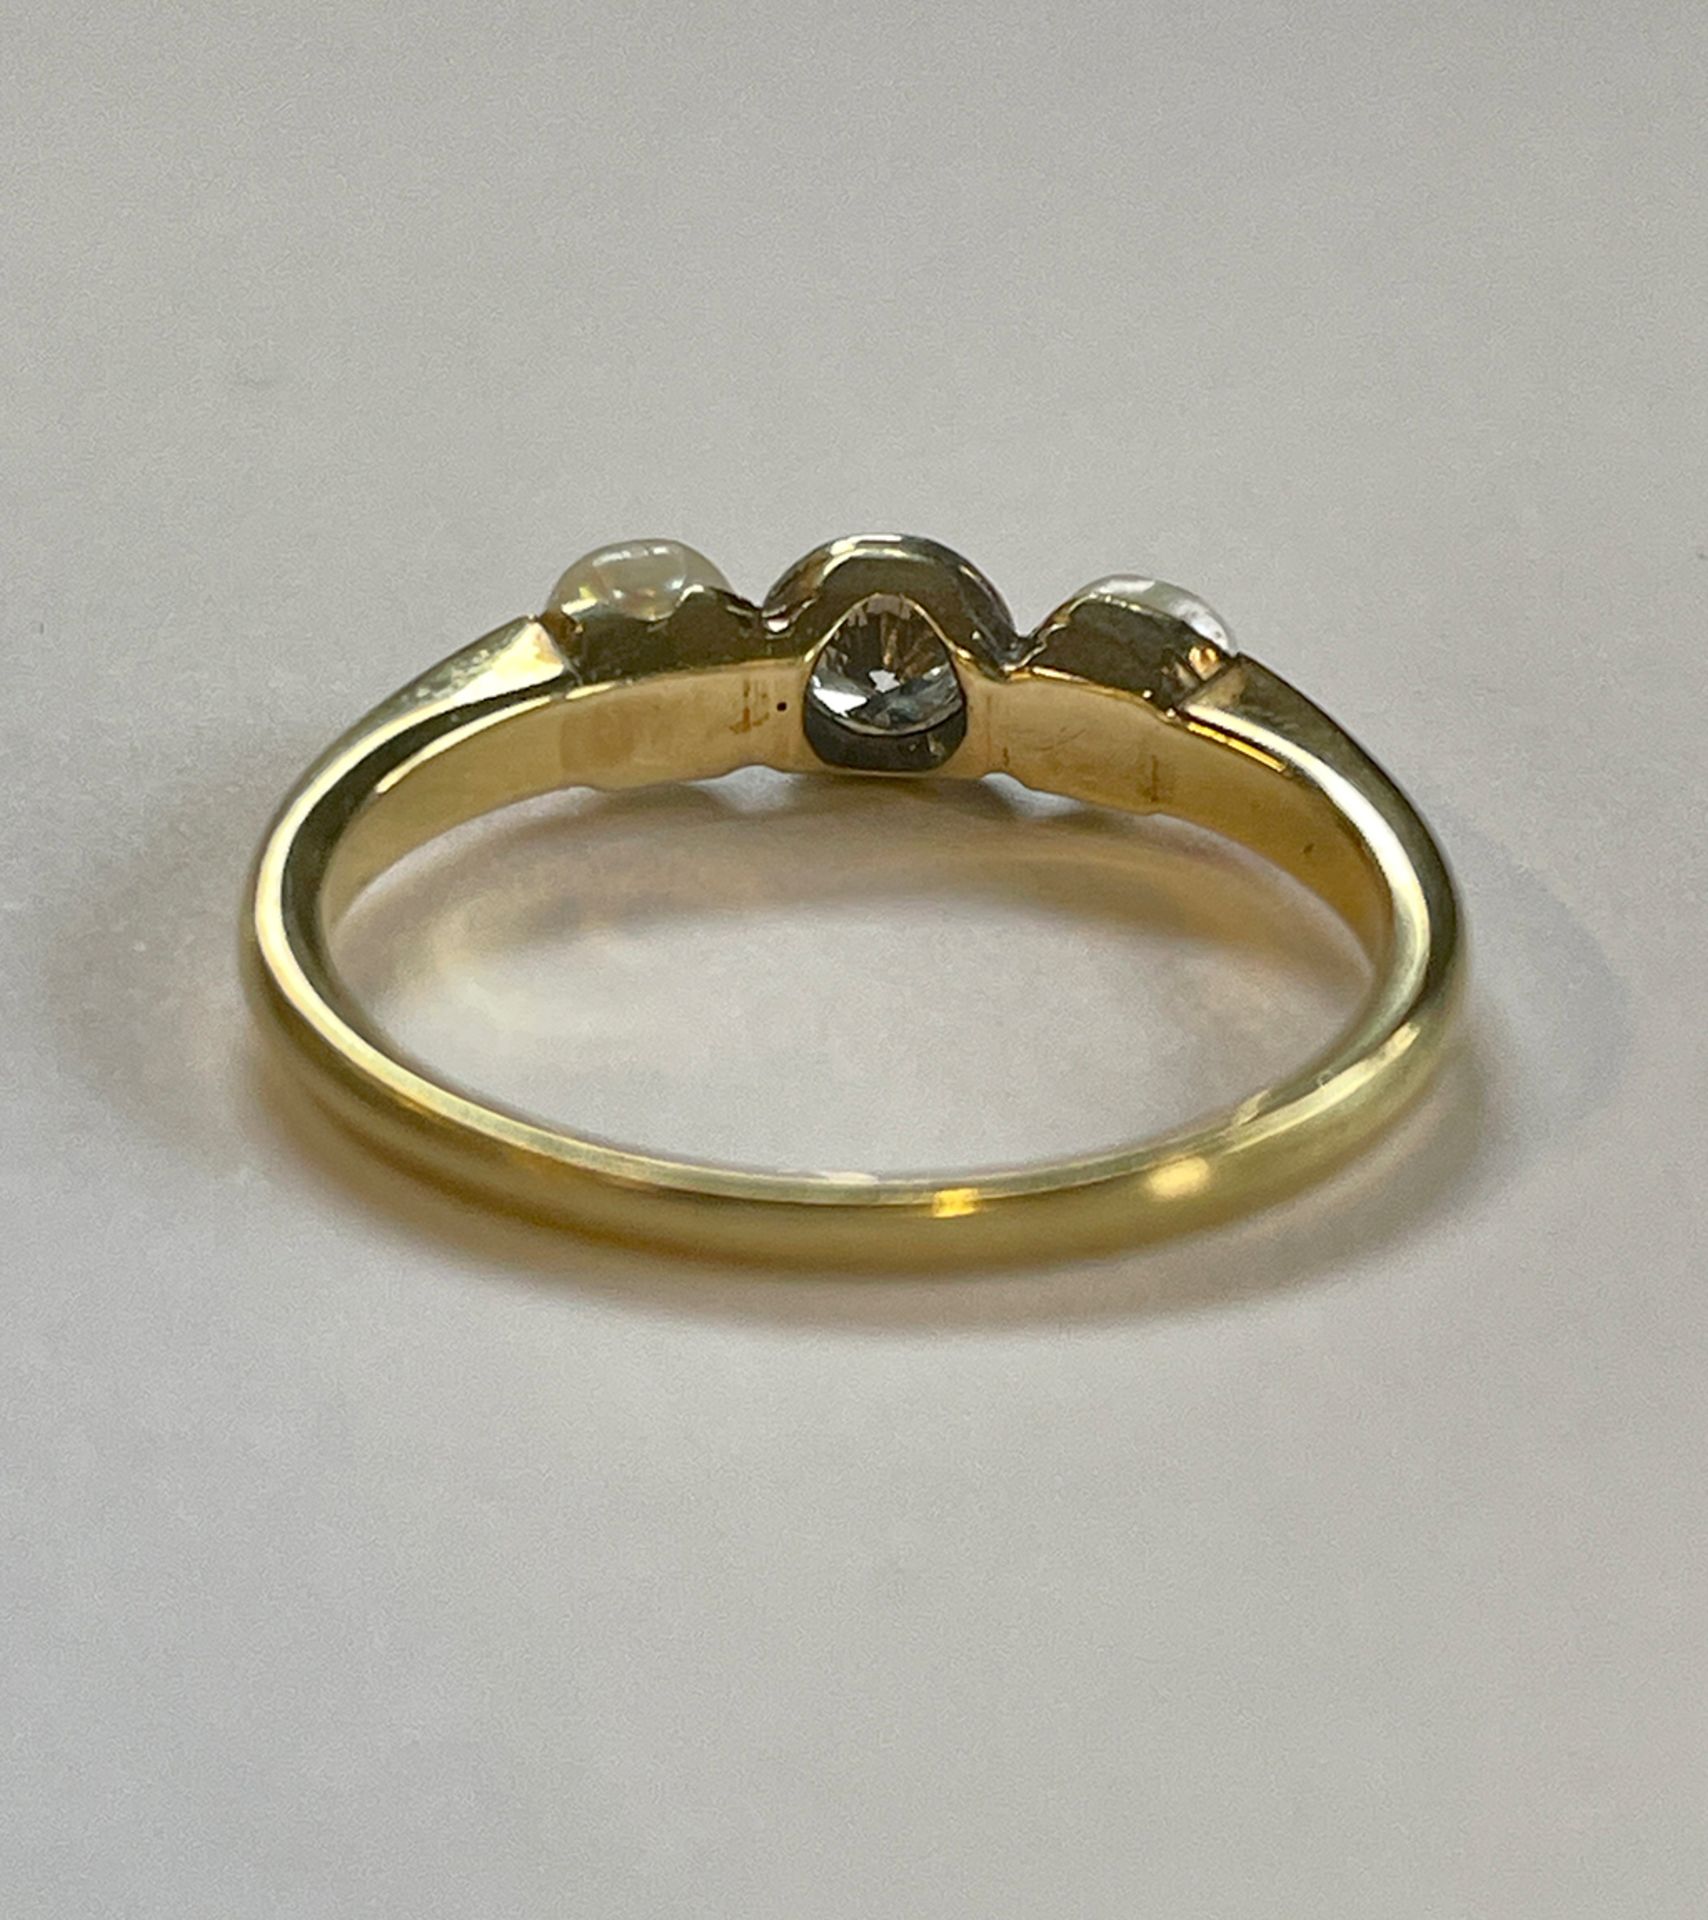 Vintage Designer Ring 14K Gold with One Diamond and Two Pearls - Image 3 of 3